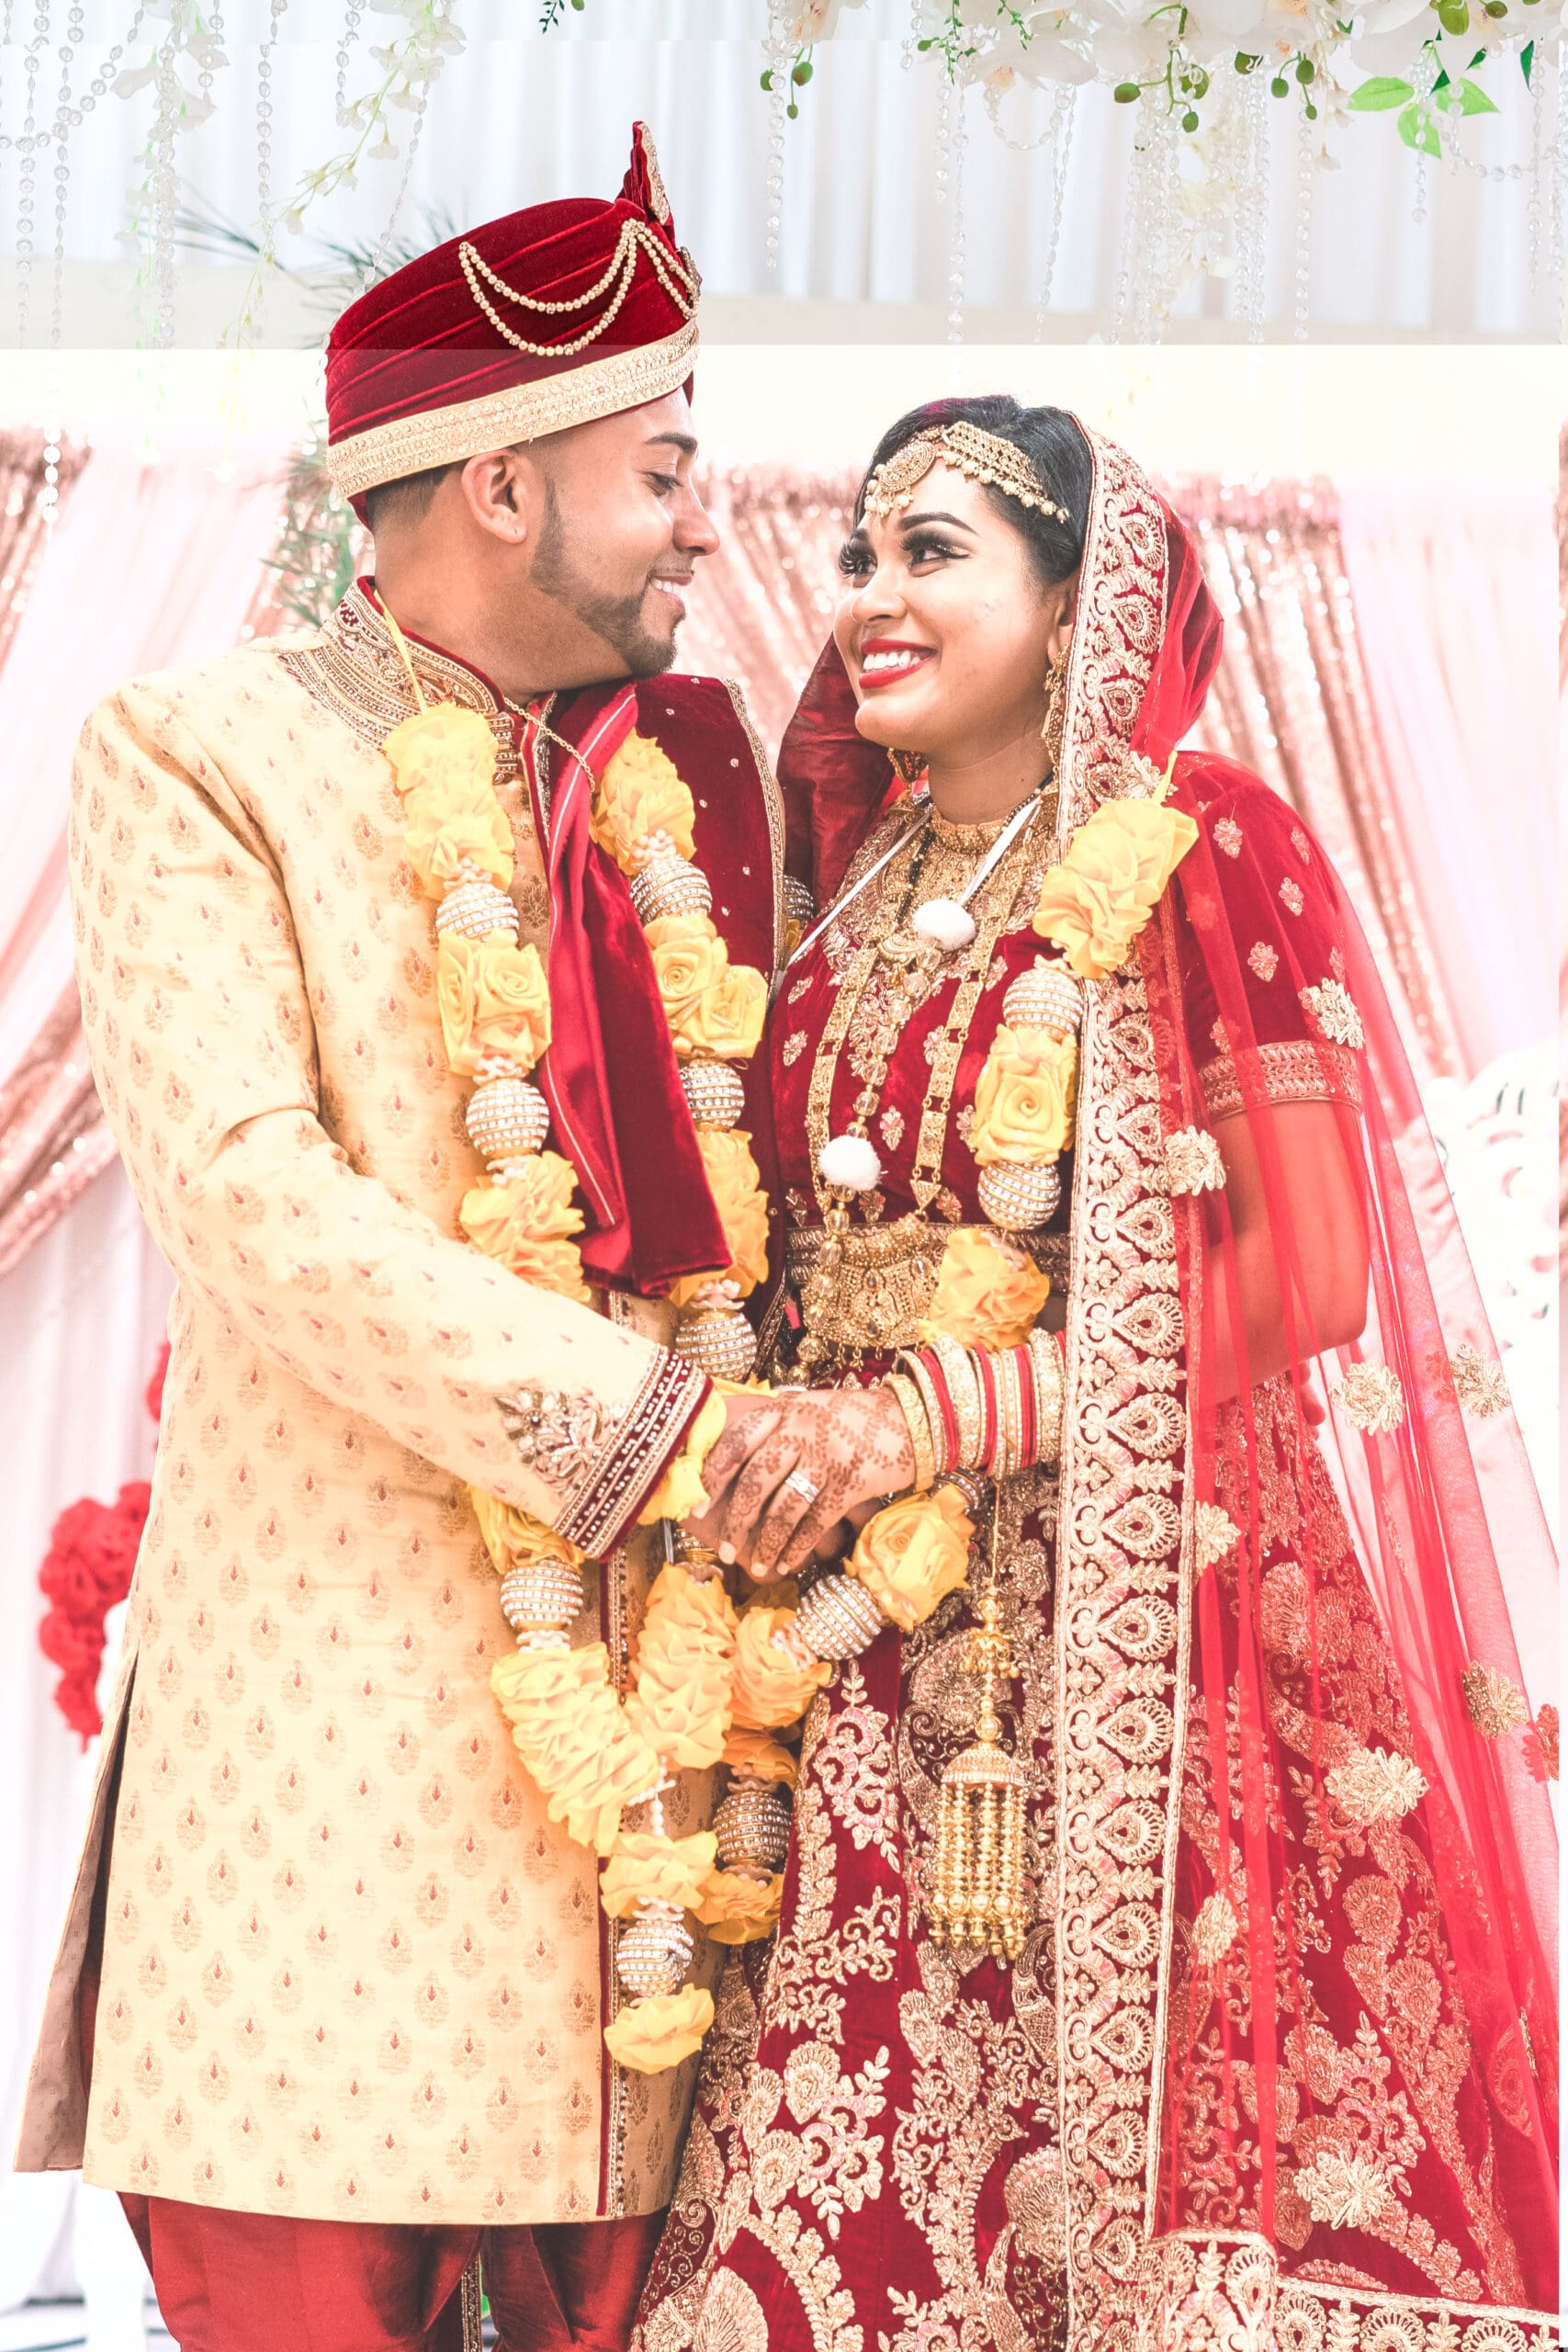 A couple dressed in red and gold traditional Indian wedding garments gaze into each other's eyes, embodying love and cultural richness.